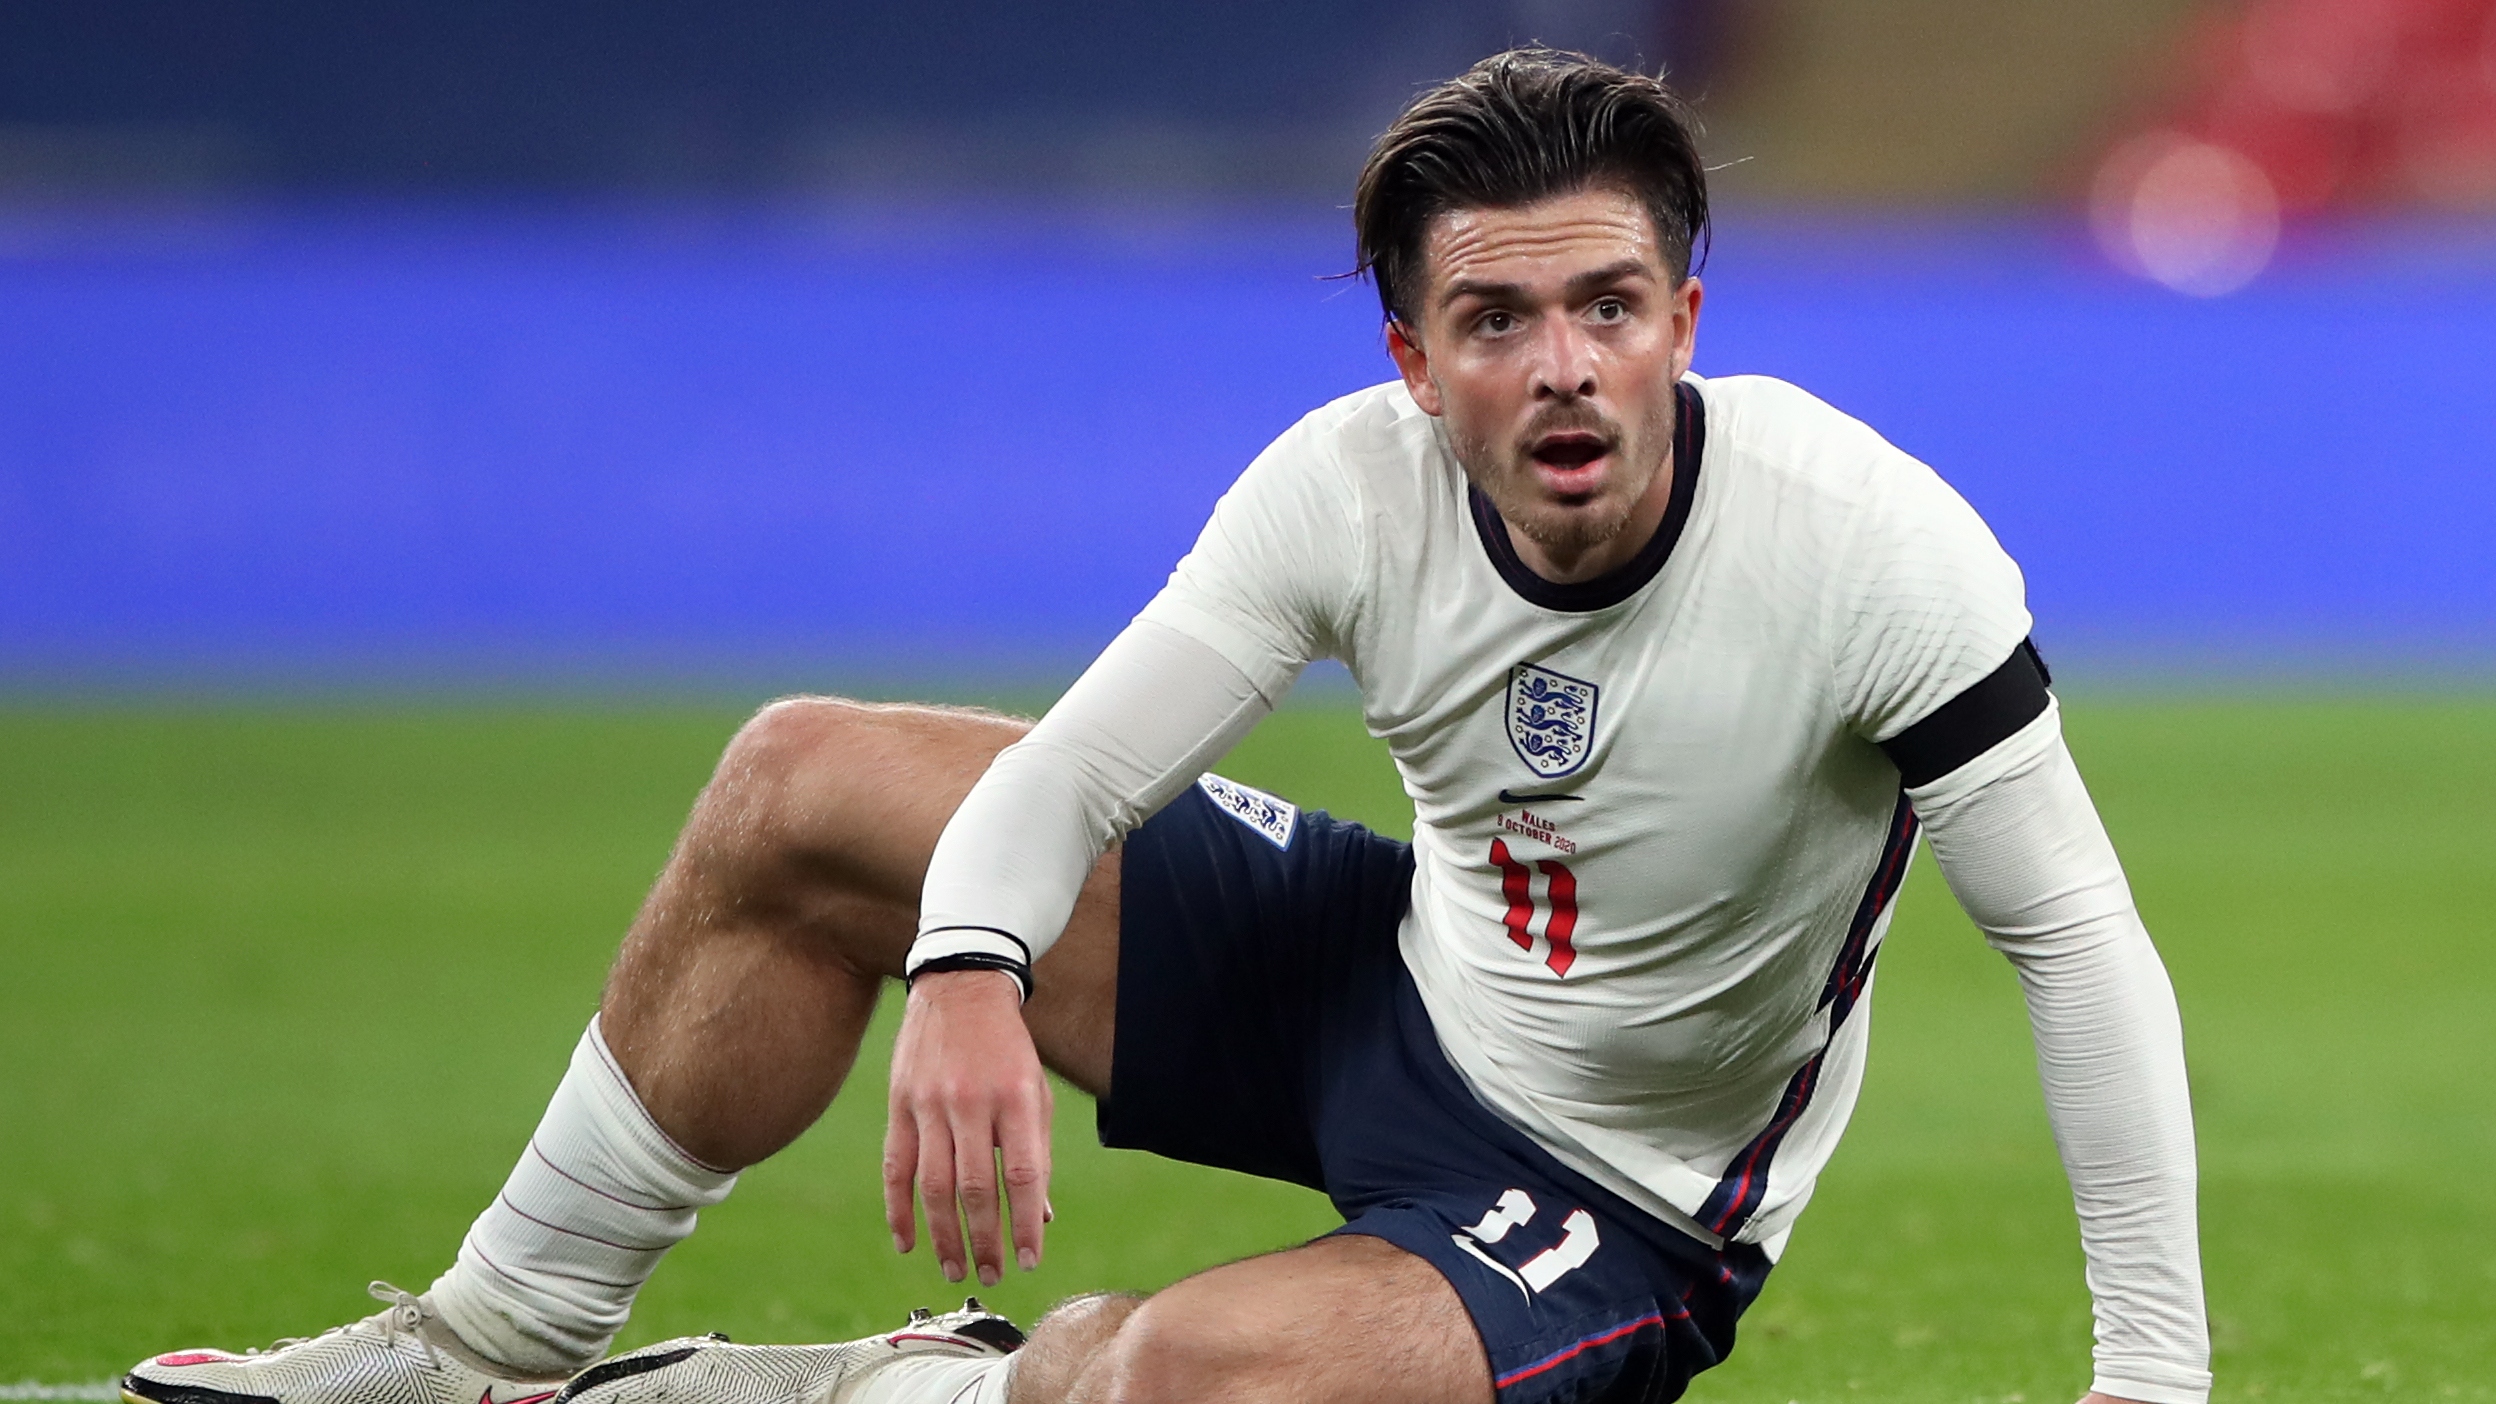 'We had to go with speed' - Southgate defends decision to snub Grealish in England defeat